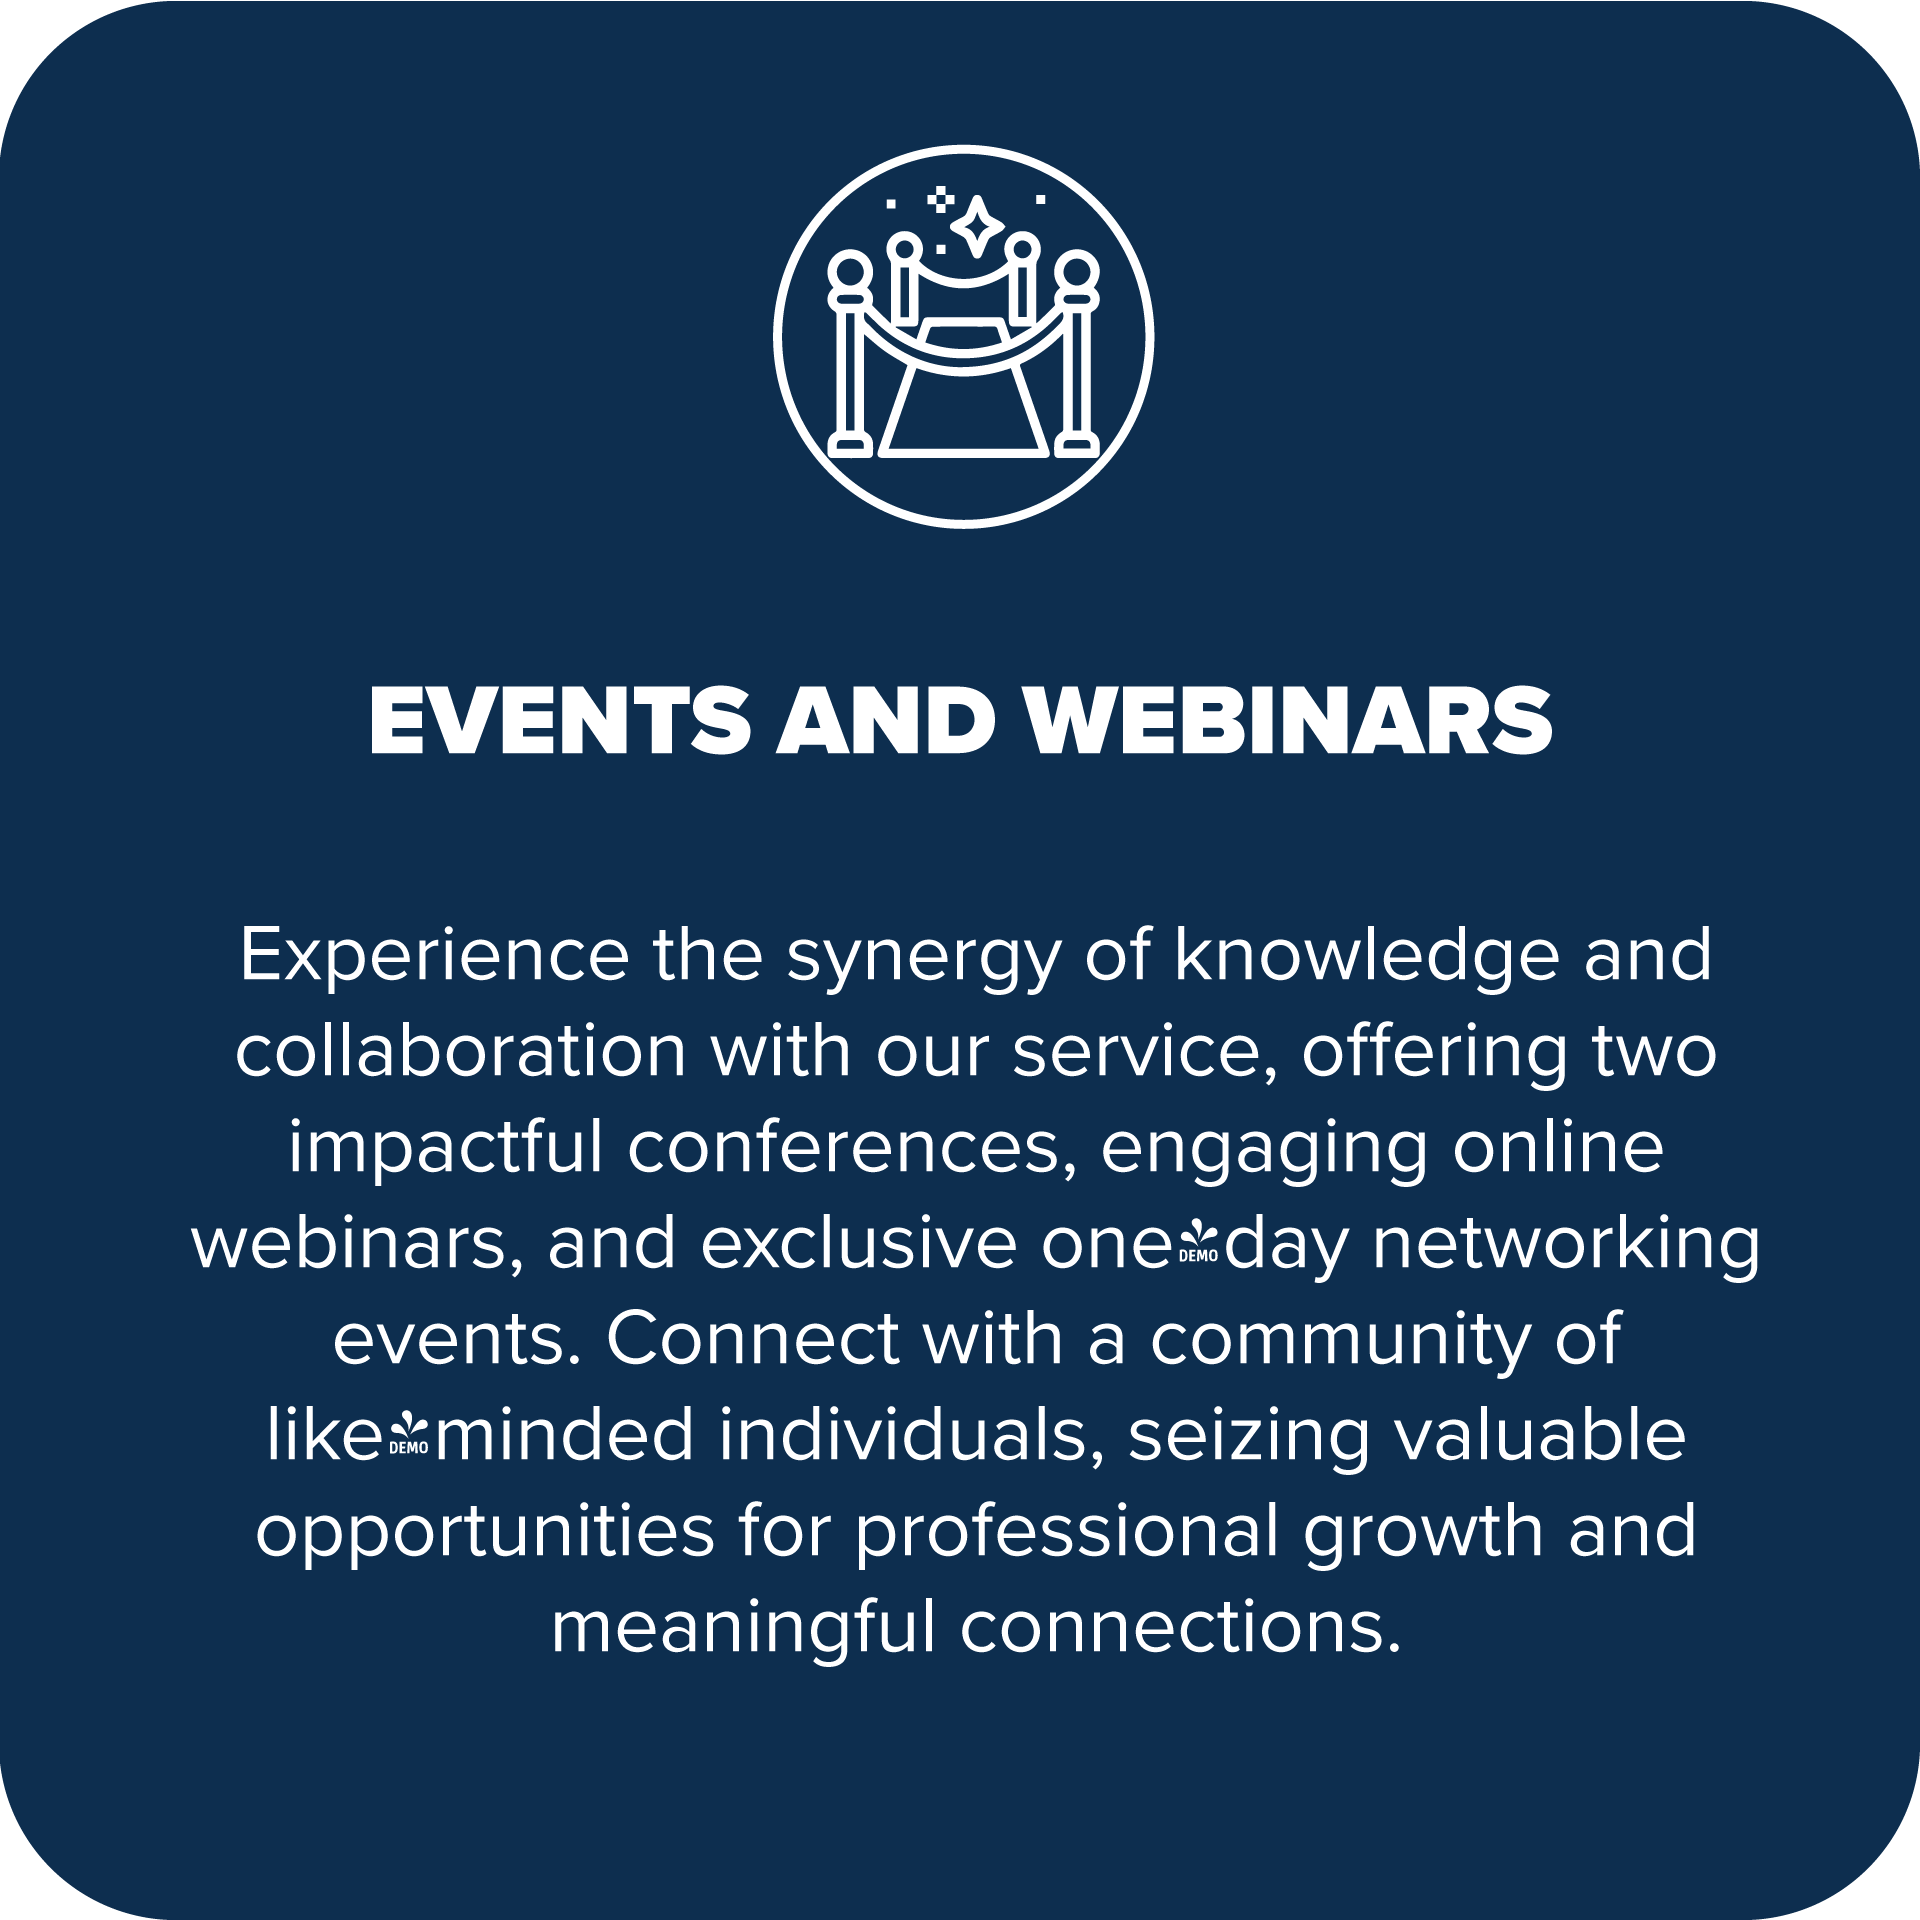 EVENTS-AND-WEBINARS